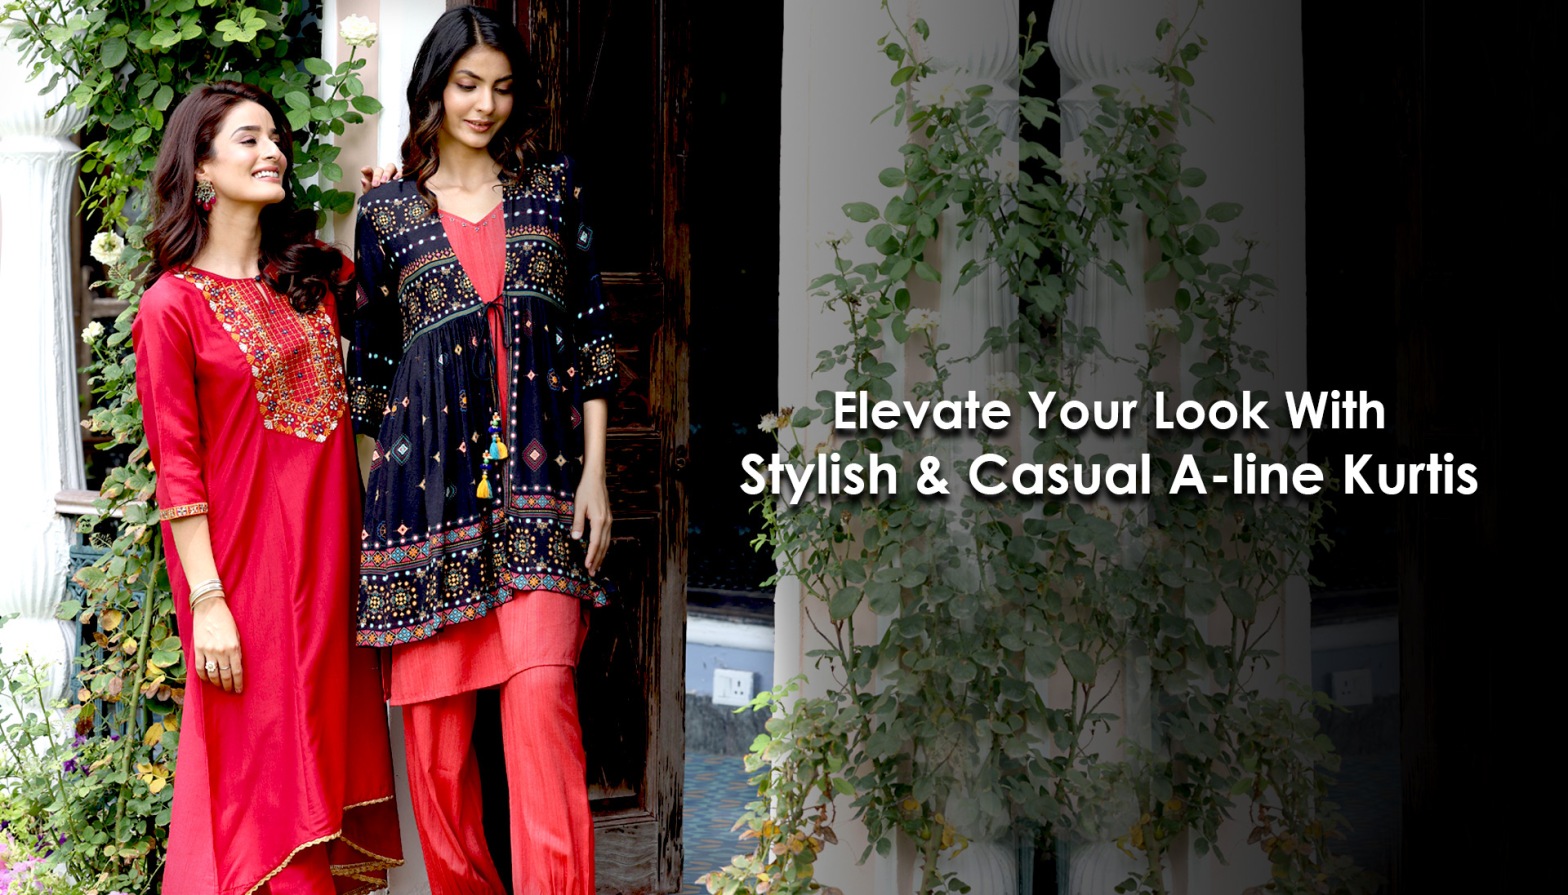 Elevate Your Look With Stylish Casual And Couture A-line Kurtis